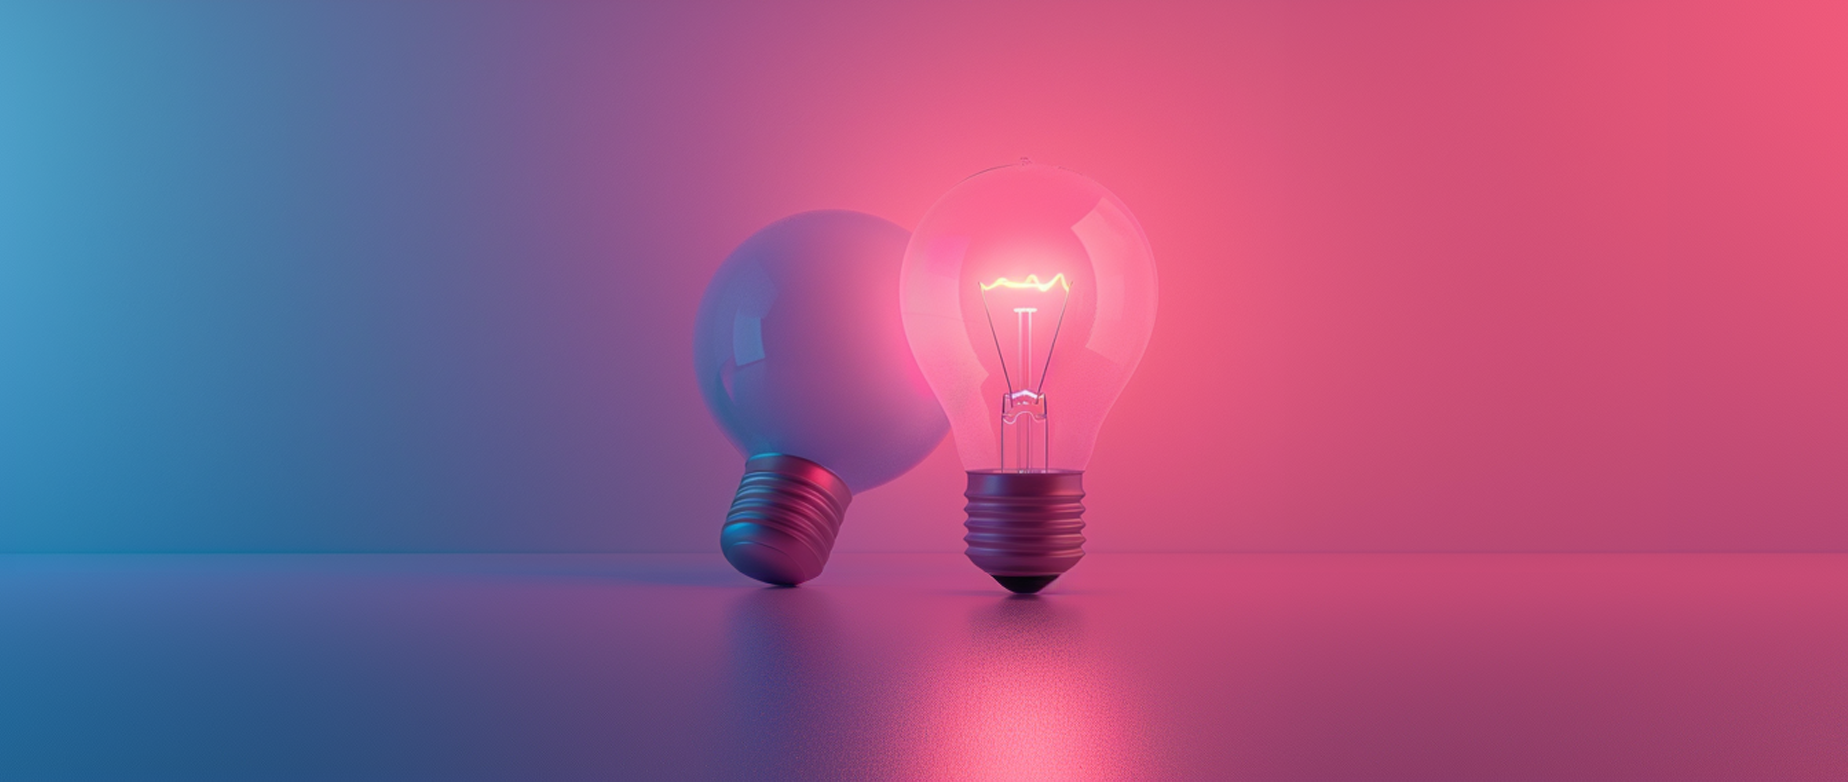 A lit light bulb next to an unlit lightbulb laying on its side on a blue and pink background.